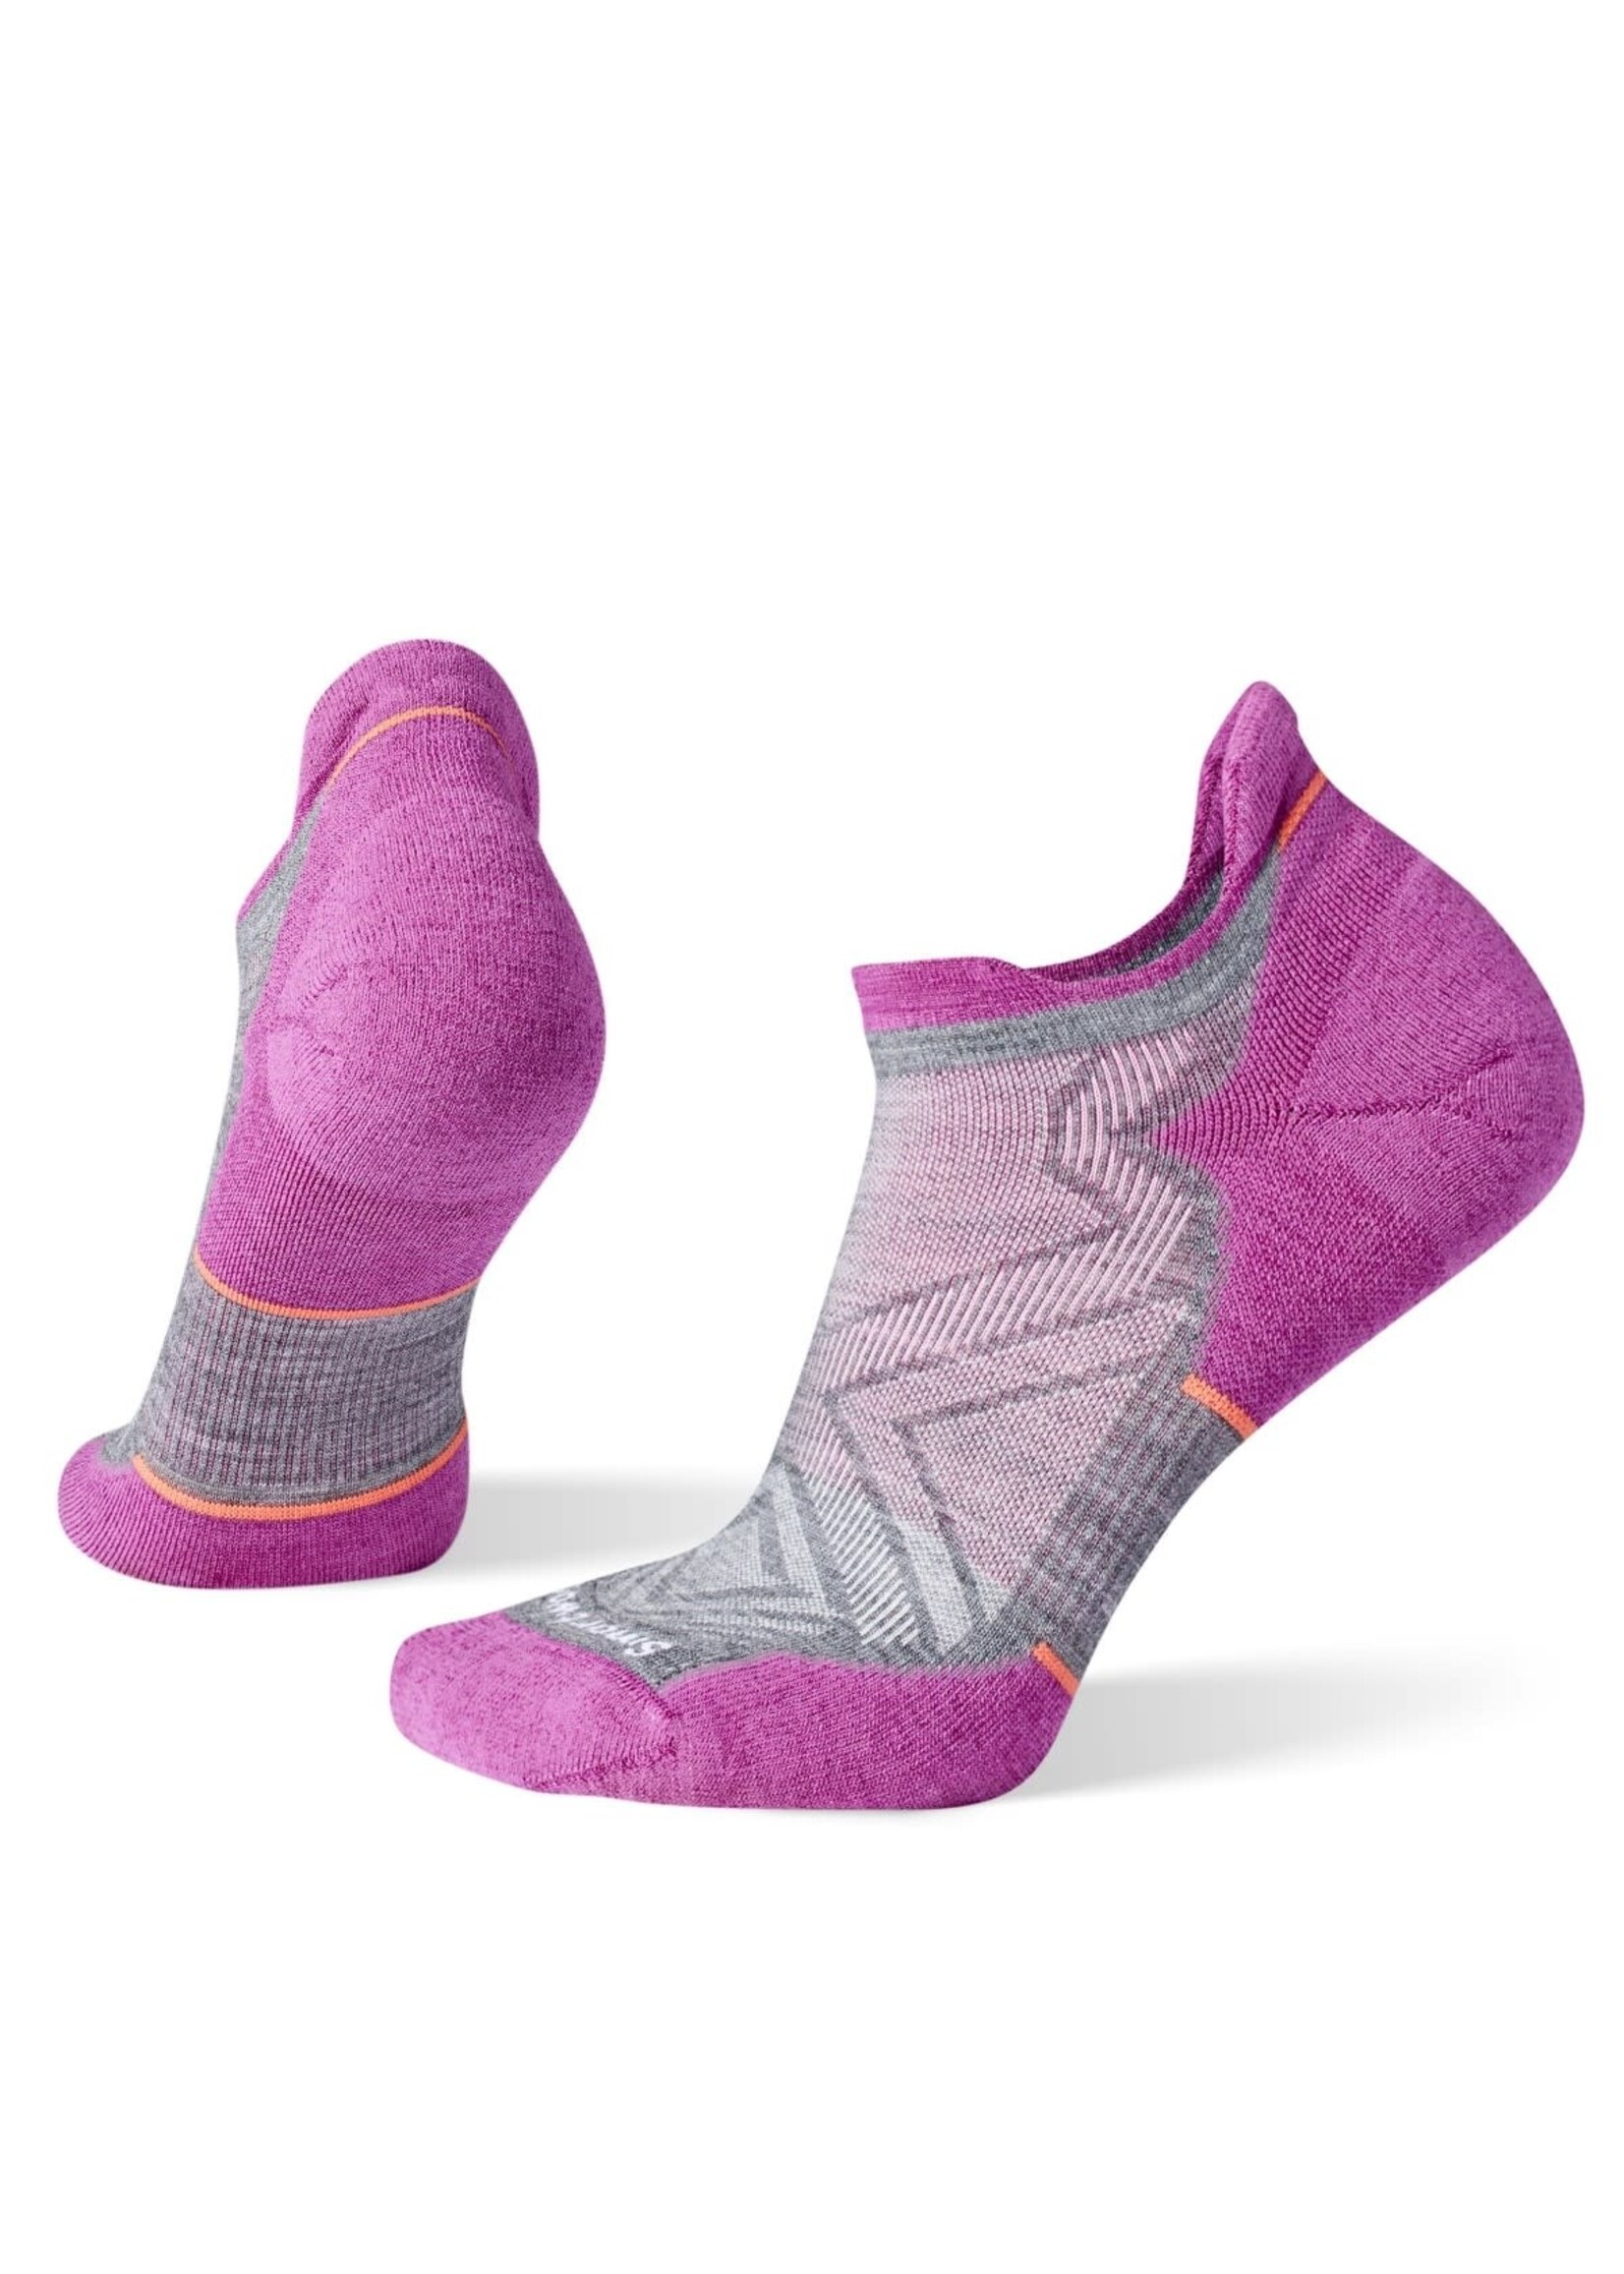 Smartwool Smartwool Run Targeted Cushion Low Ankle - Women